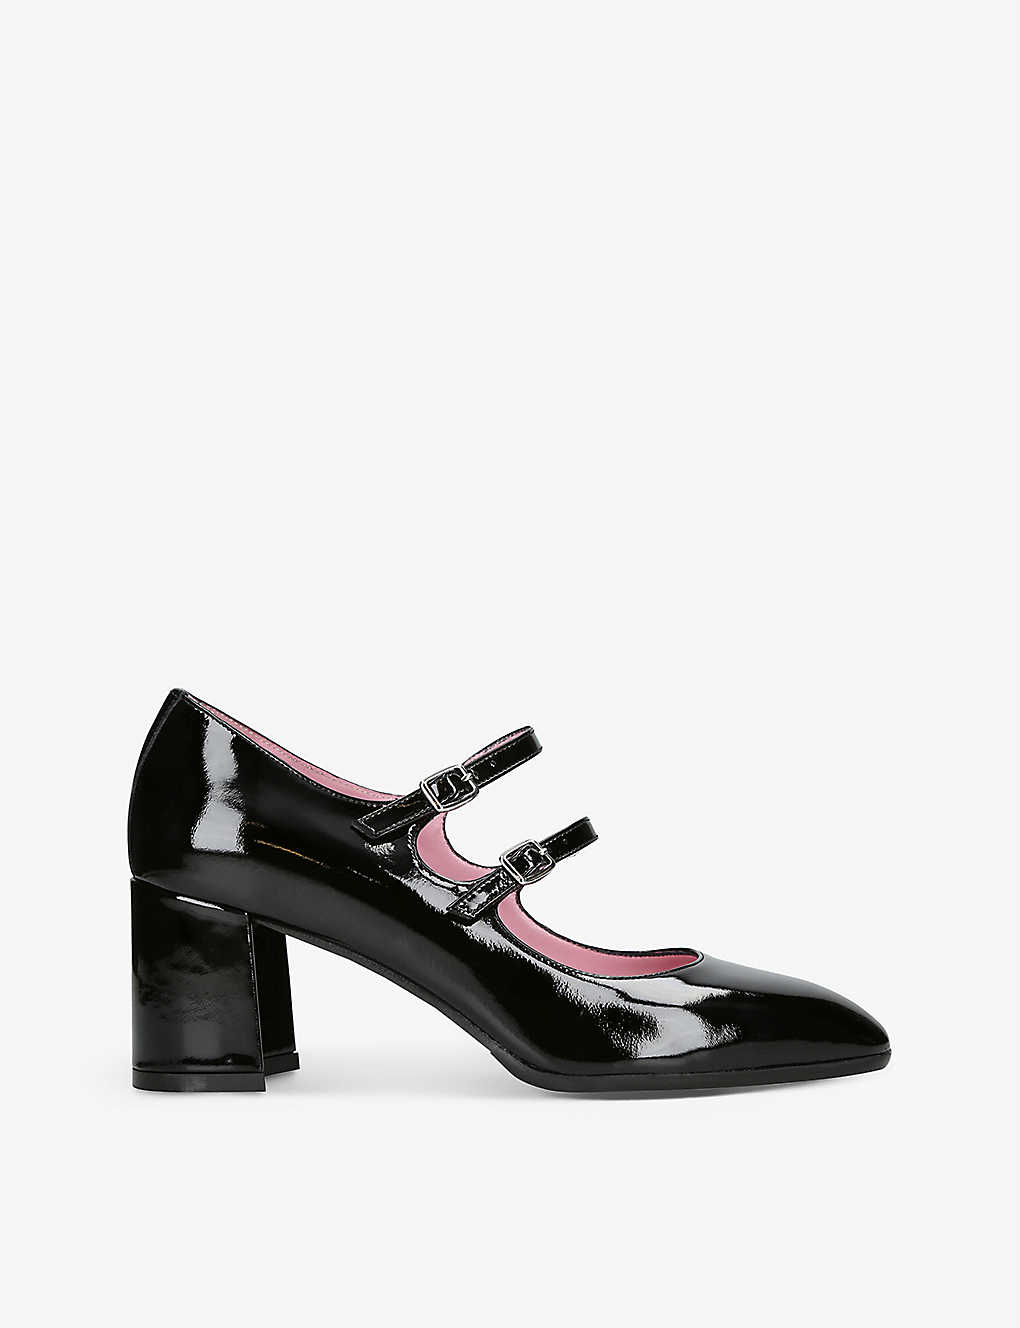 Shop Carel Women's Black Alice Double-strap Patent-leather Mary Jane Heels